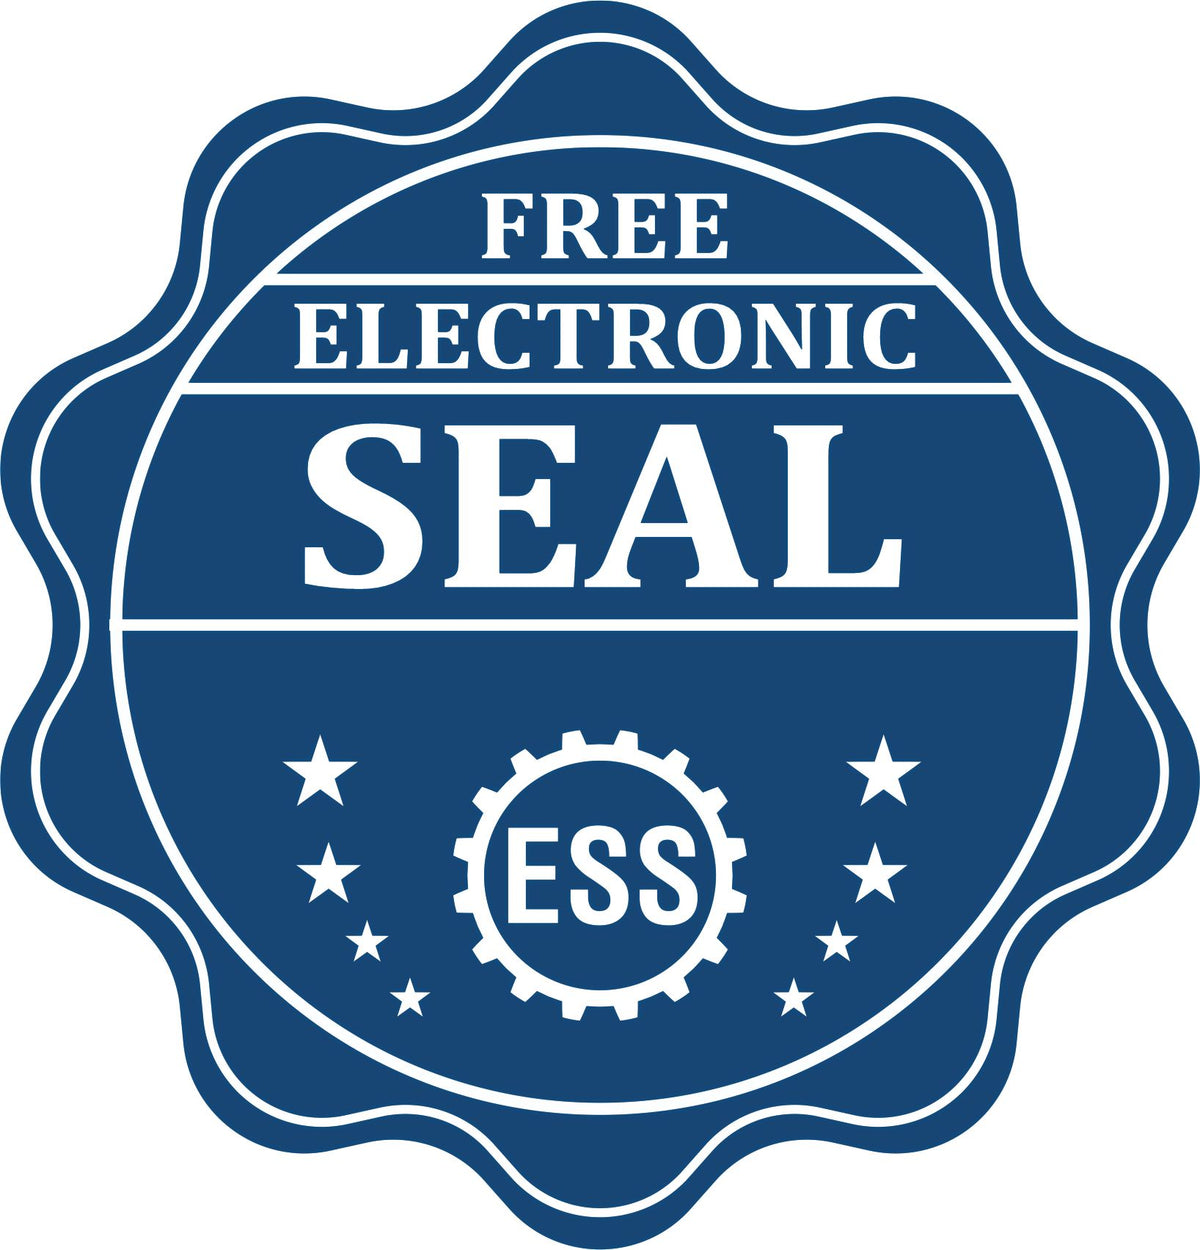 A badge showing a free electronic seal for the Hybrid Rhode Island Architect Seal with stars and the ESS gear on the emblem.